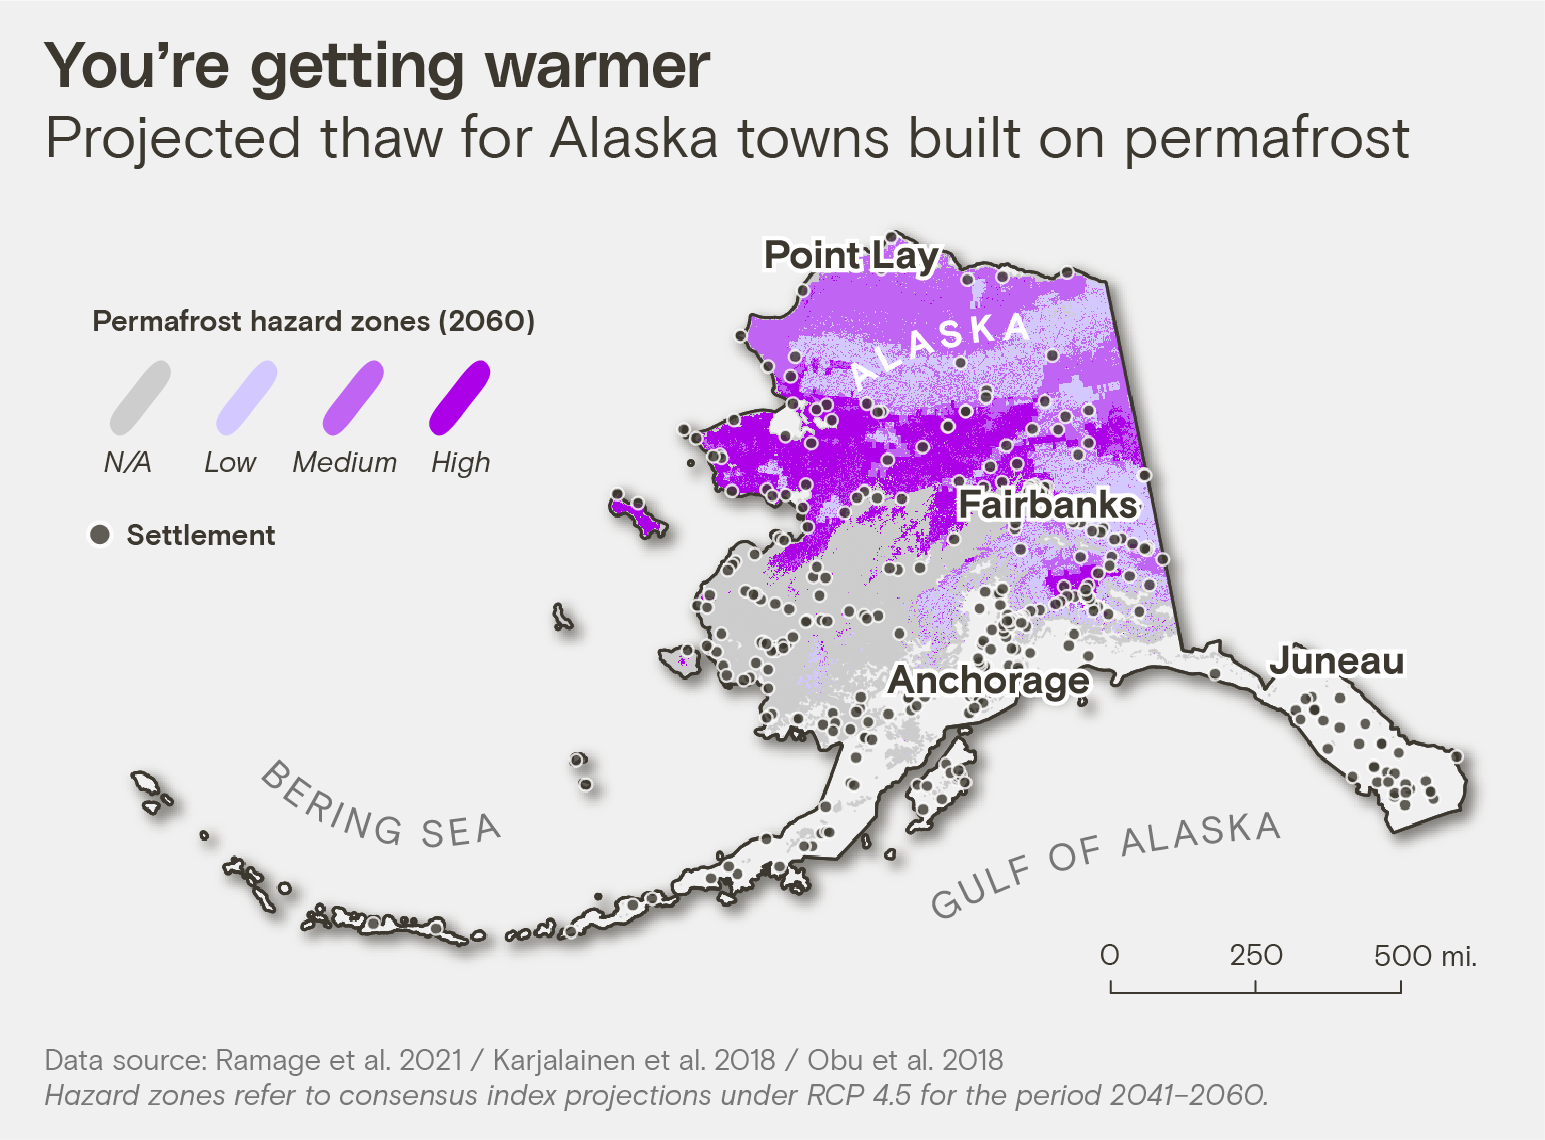 A map showing projected thaw for Alaska towns built on permafrost. Hundreds of communities in the state were built on permafrost, much of which is at high risk of thaw by 2060.